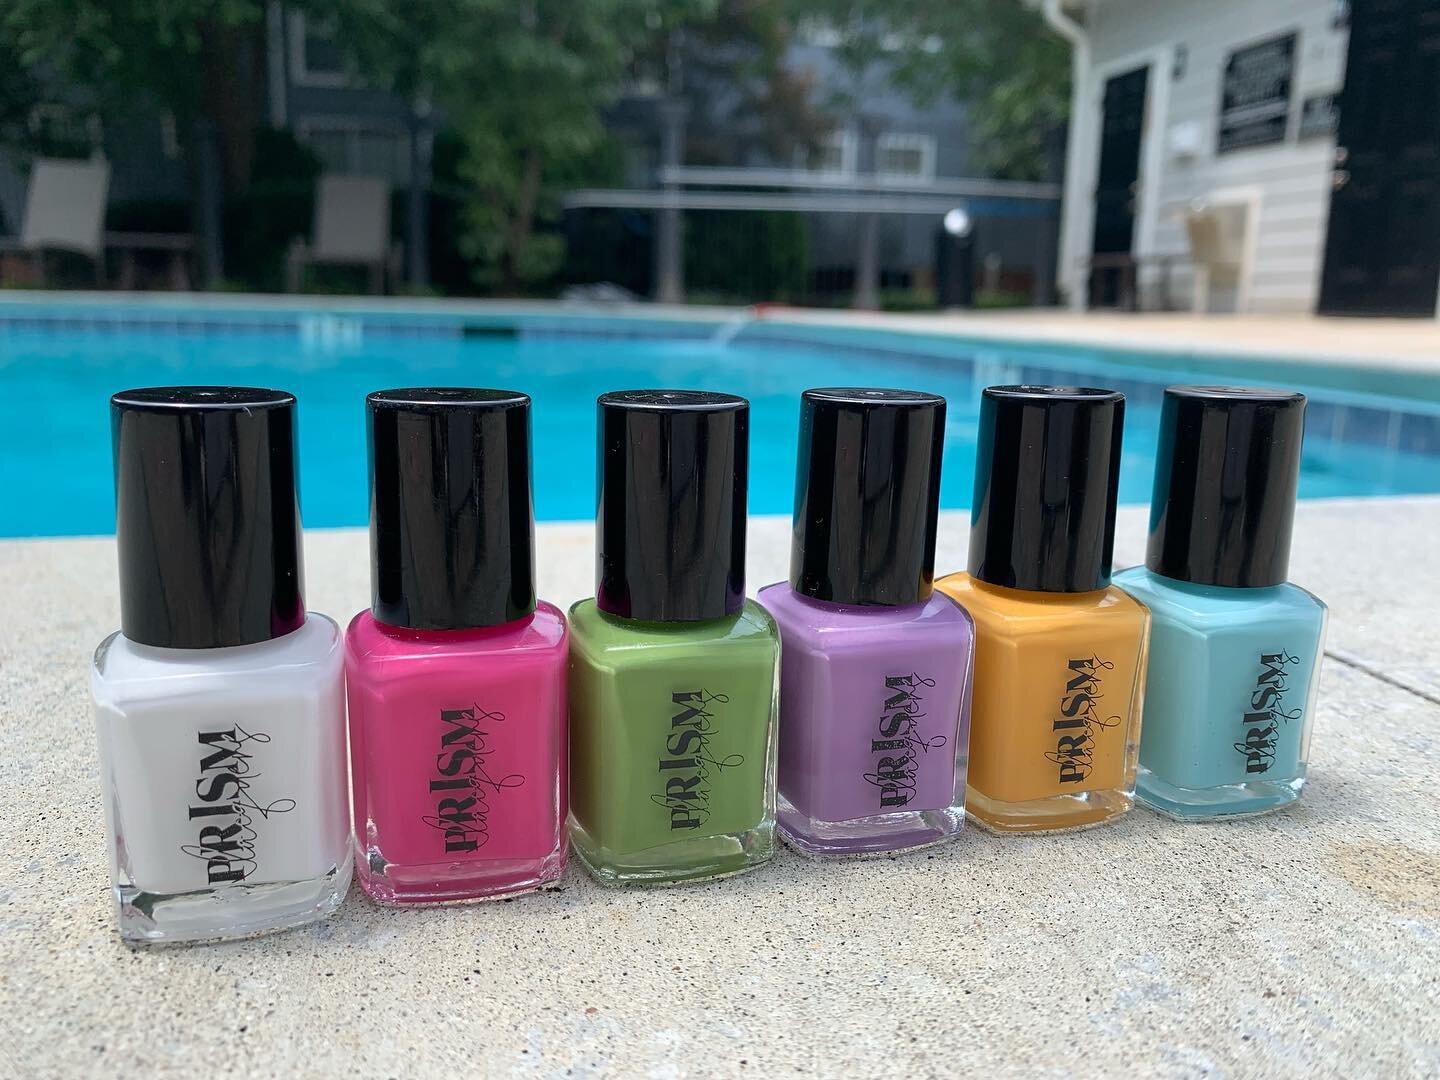 Summer vibes. ✨

What colors did you snag from our latest drop? Which ones are your faves? 

Let us know in the comments. 😍